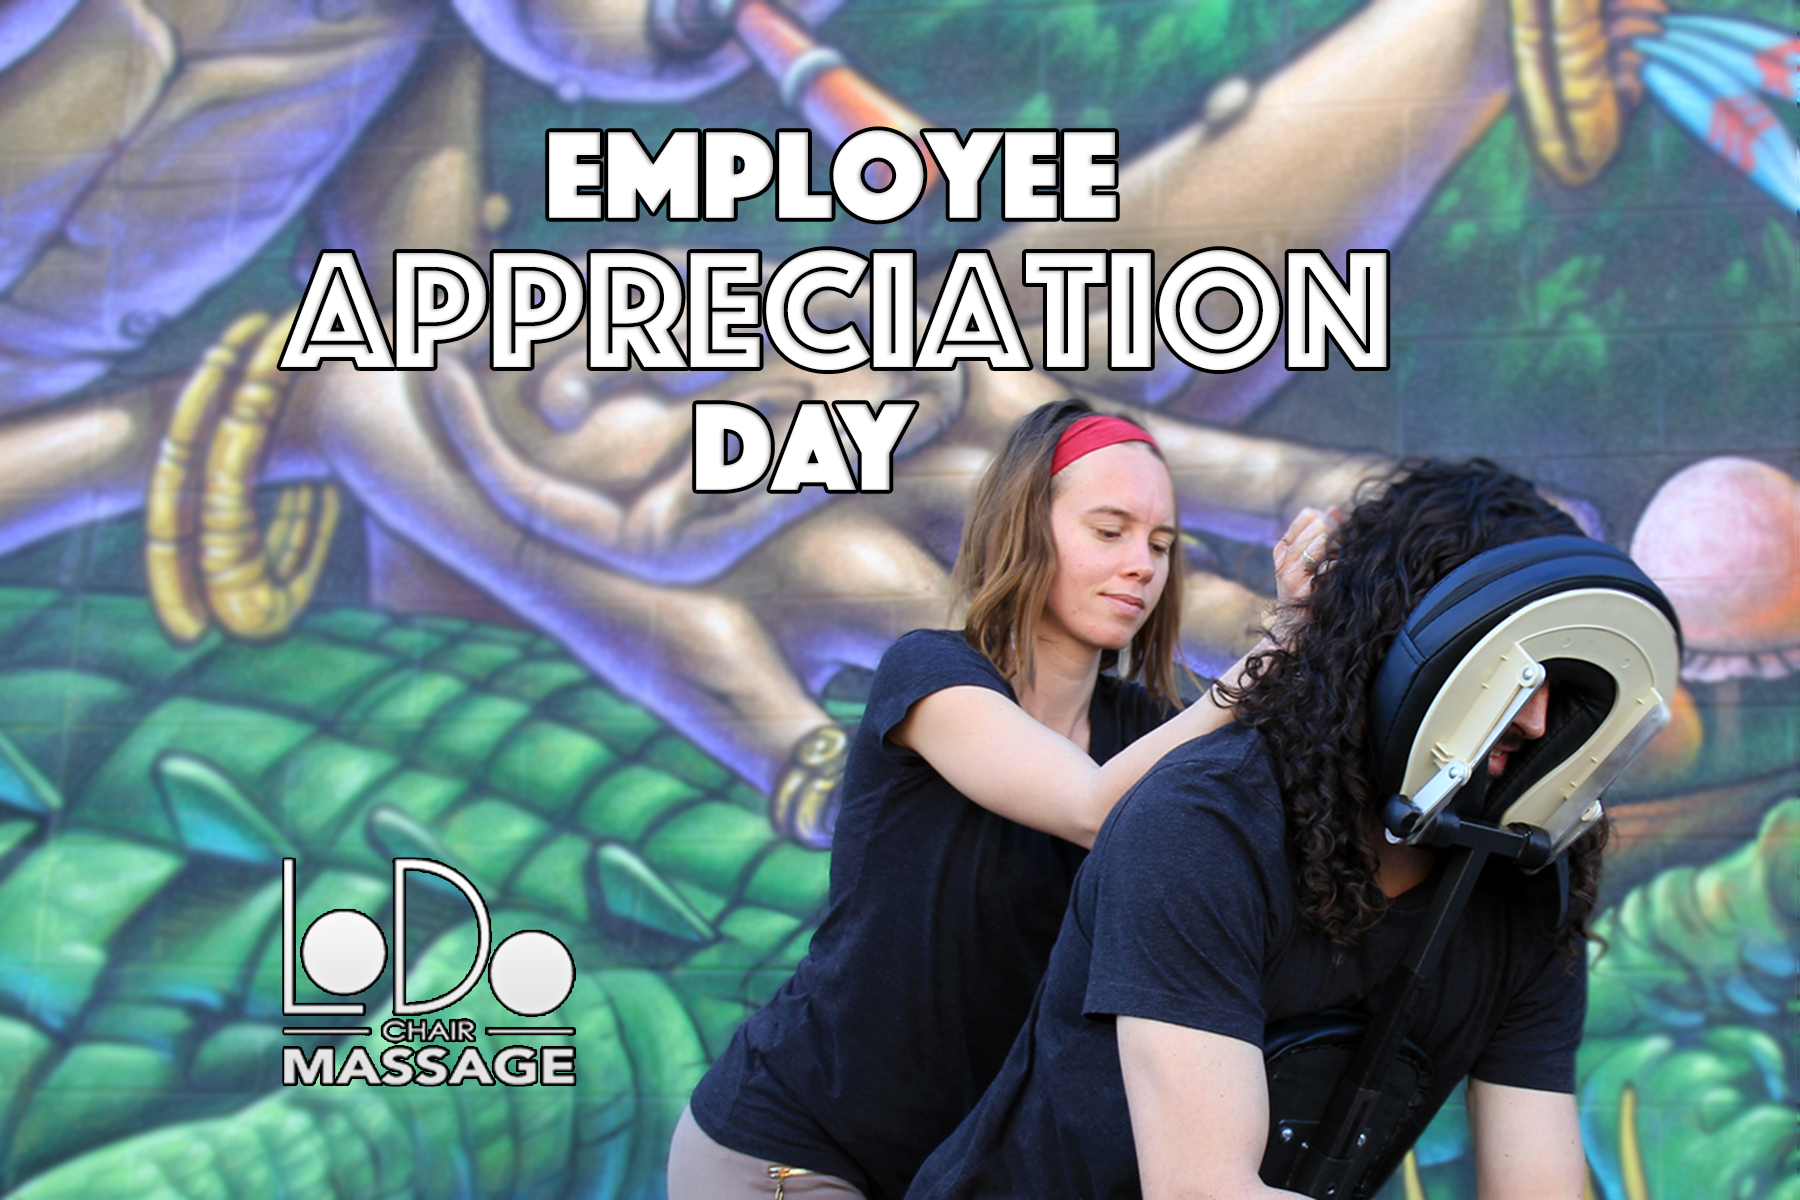  Why we're simply the best choice for Employee Appreciation Day!